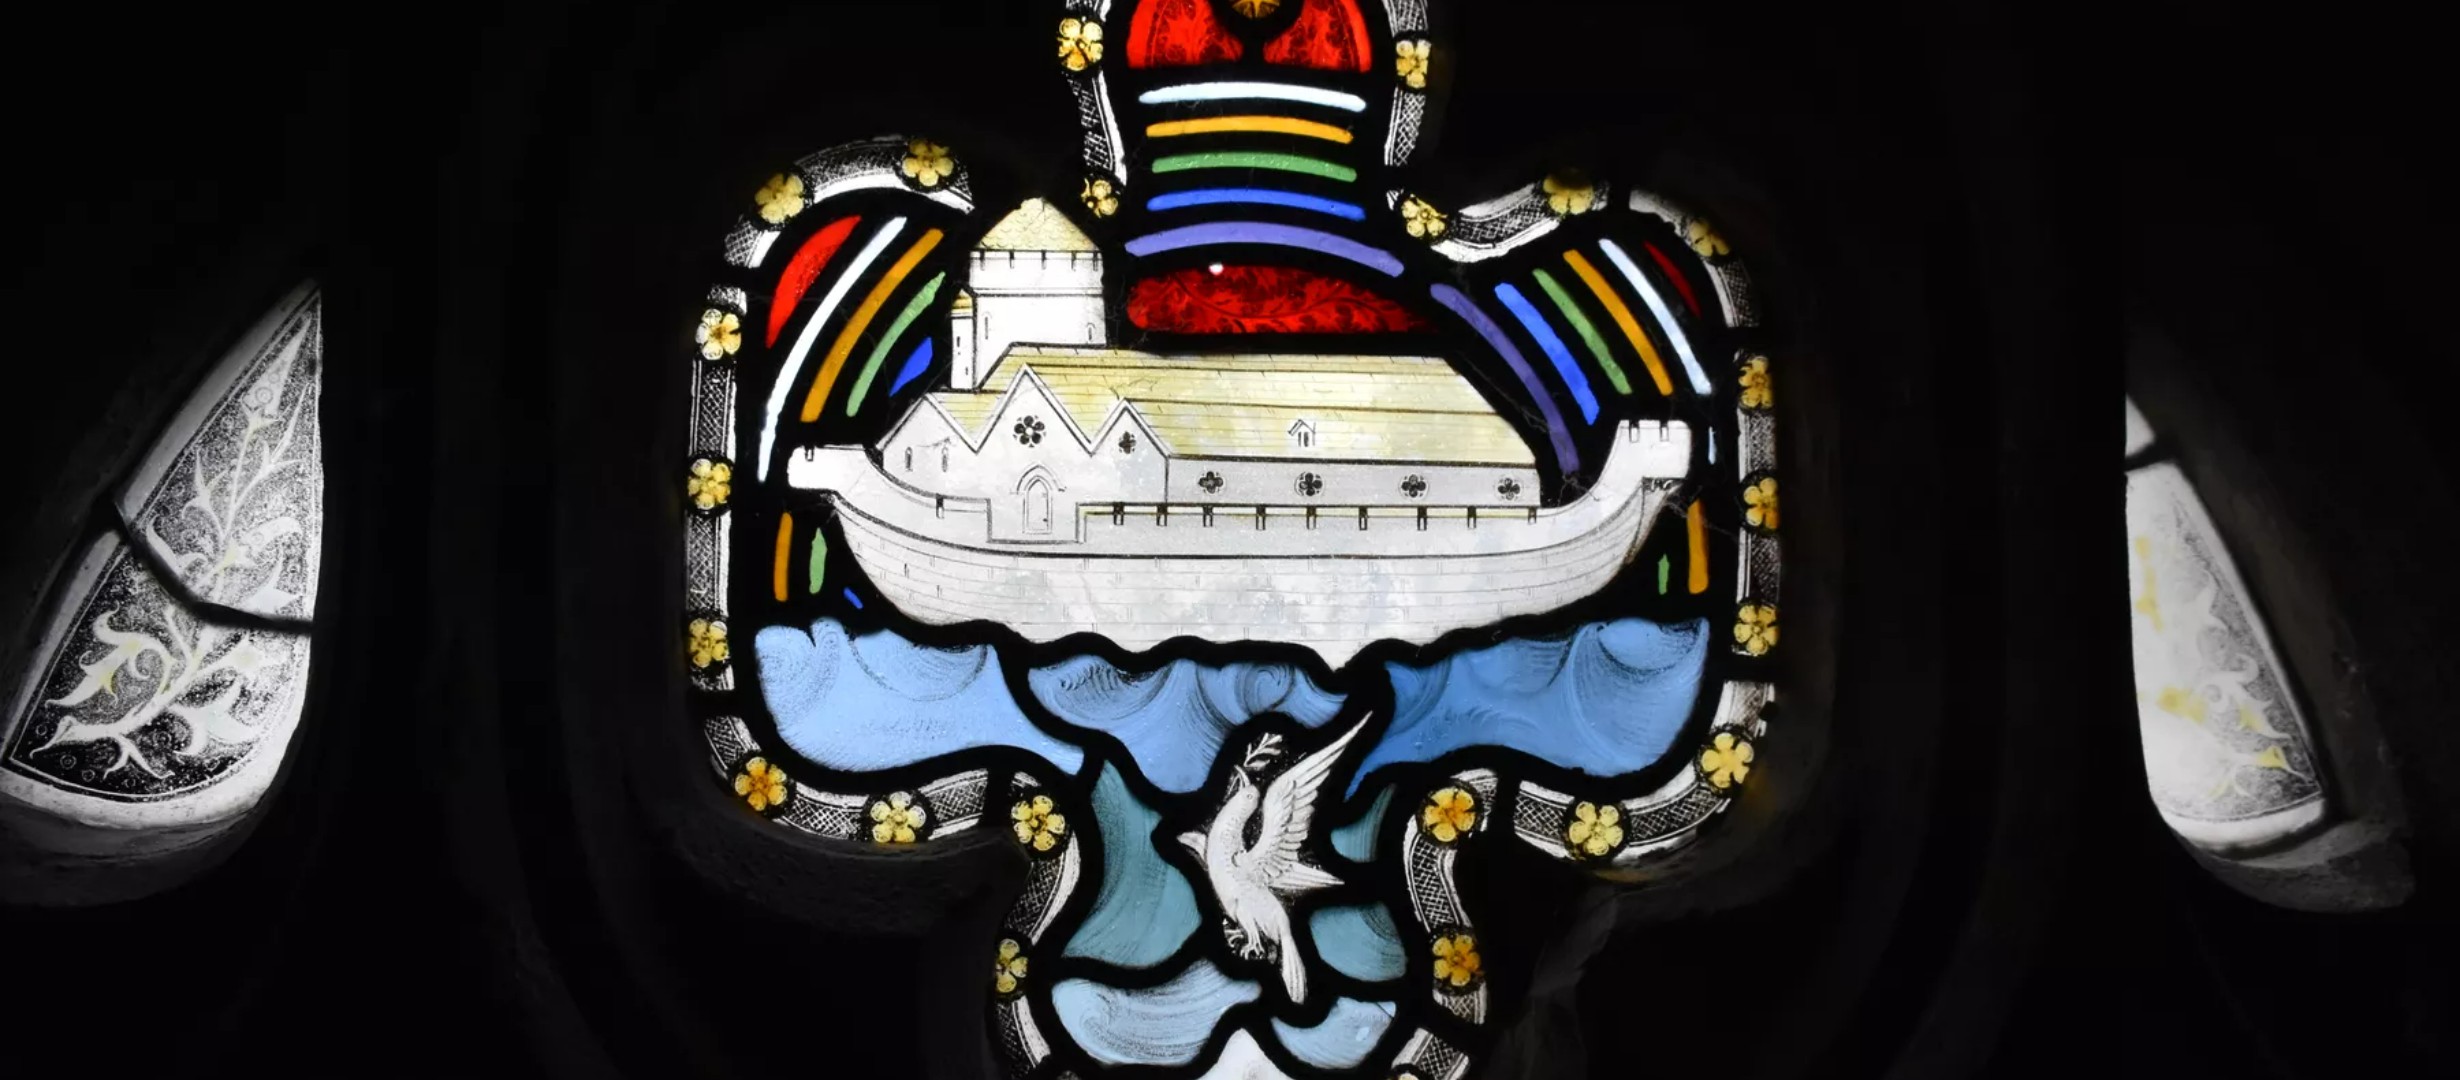 Stained glass window at Gloucester Cathedral depicting Noahs Ark with a dove underneath it, and a rainbow behind it